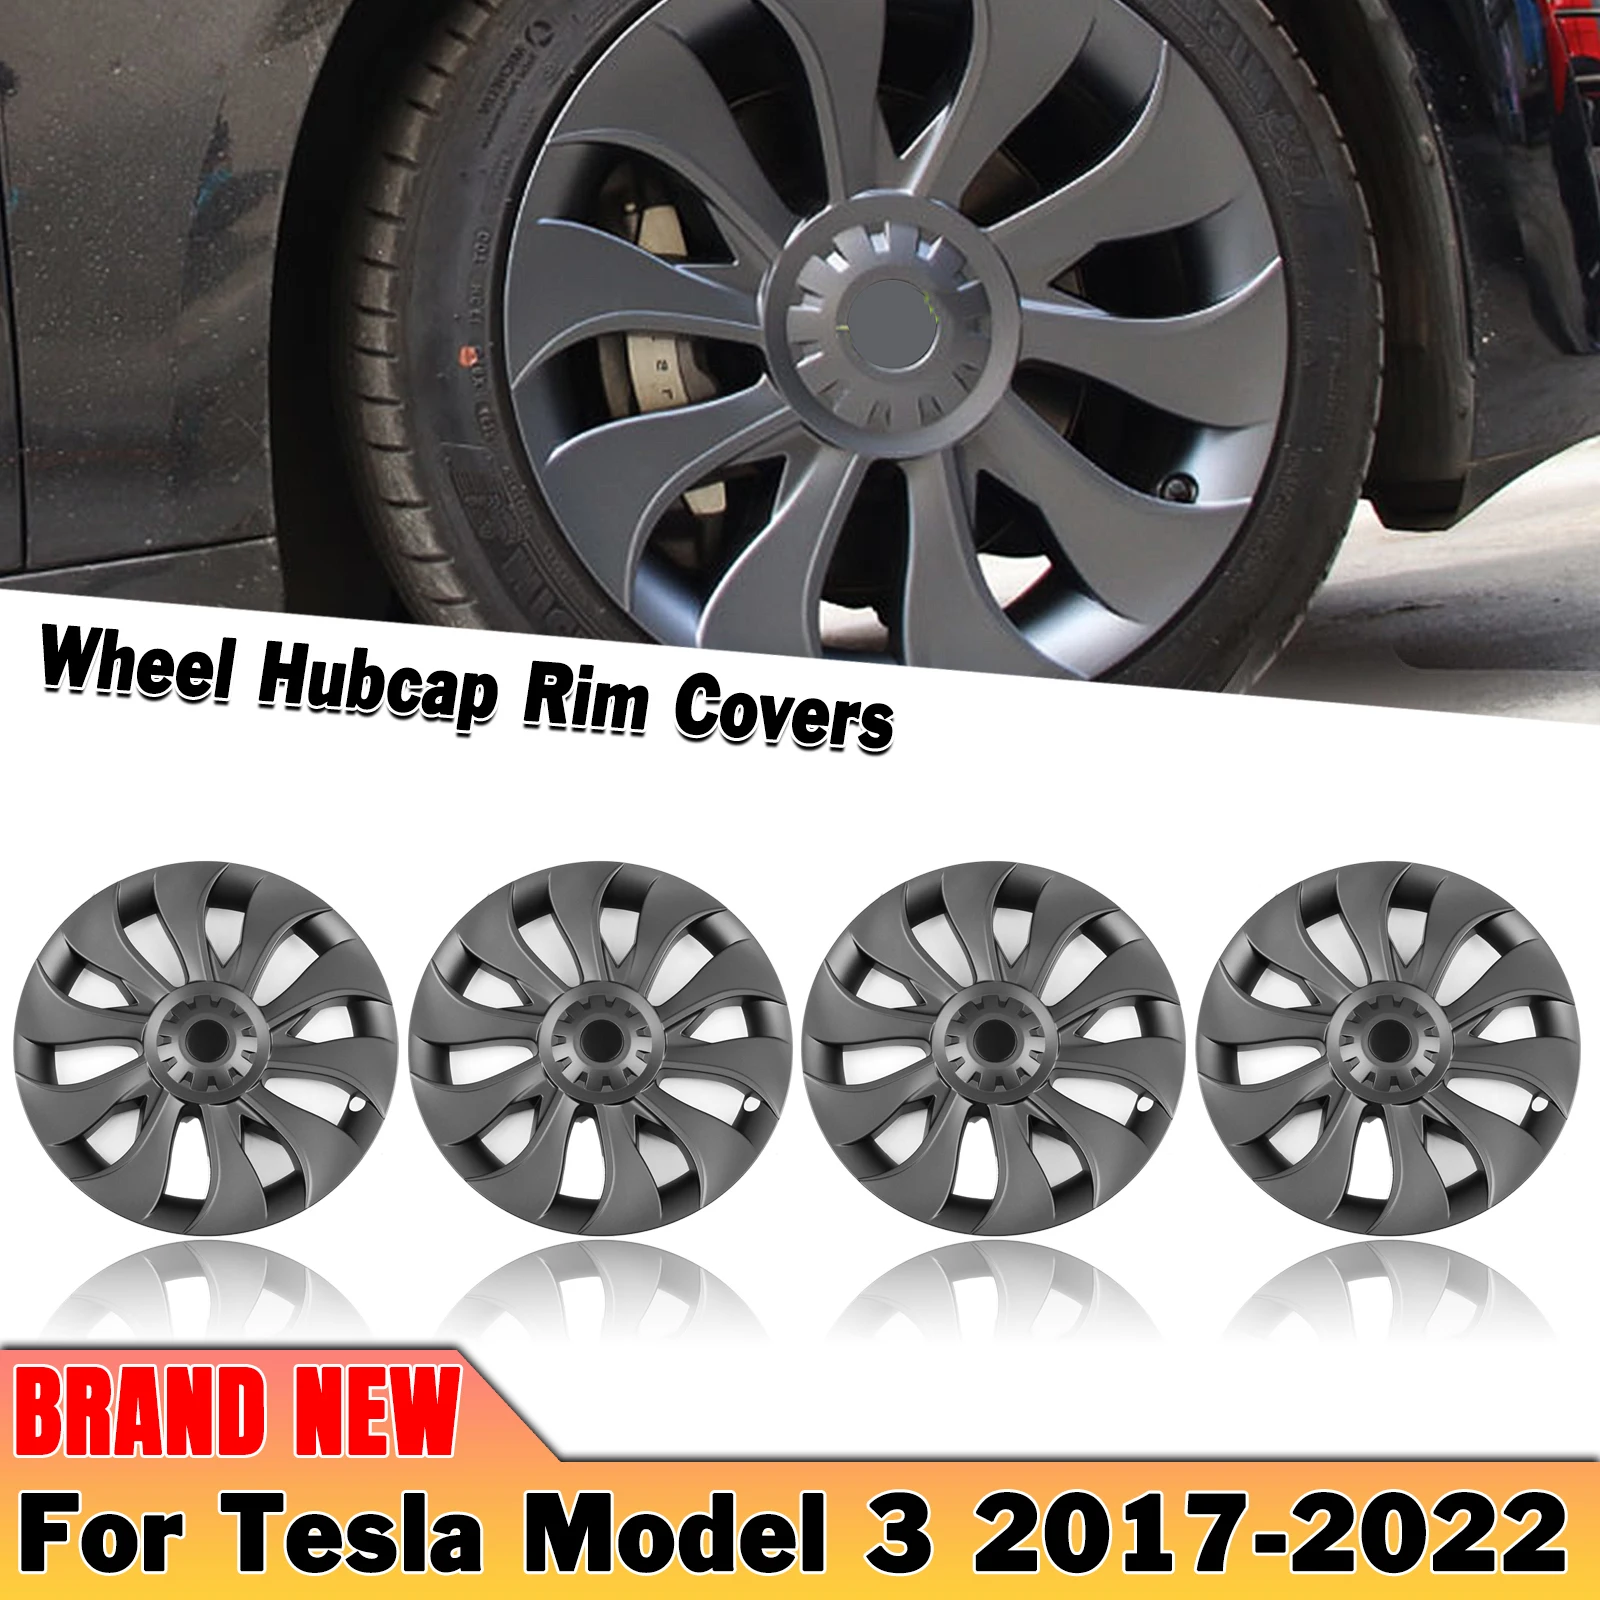 

4pcs/set 18" Wheel Cover Hubcaps Rim Cover Whirlwind Style Gray 18 Inch Car Exterior Full Hub Caps For Tesla Model 3 2017-2023